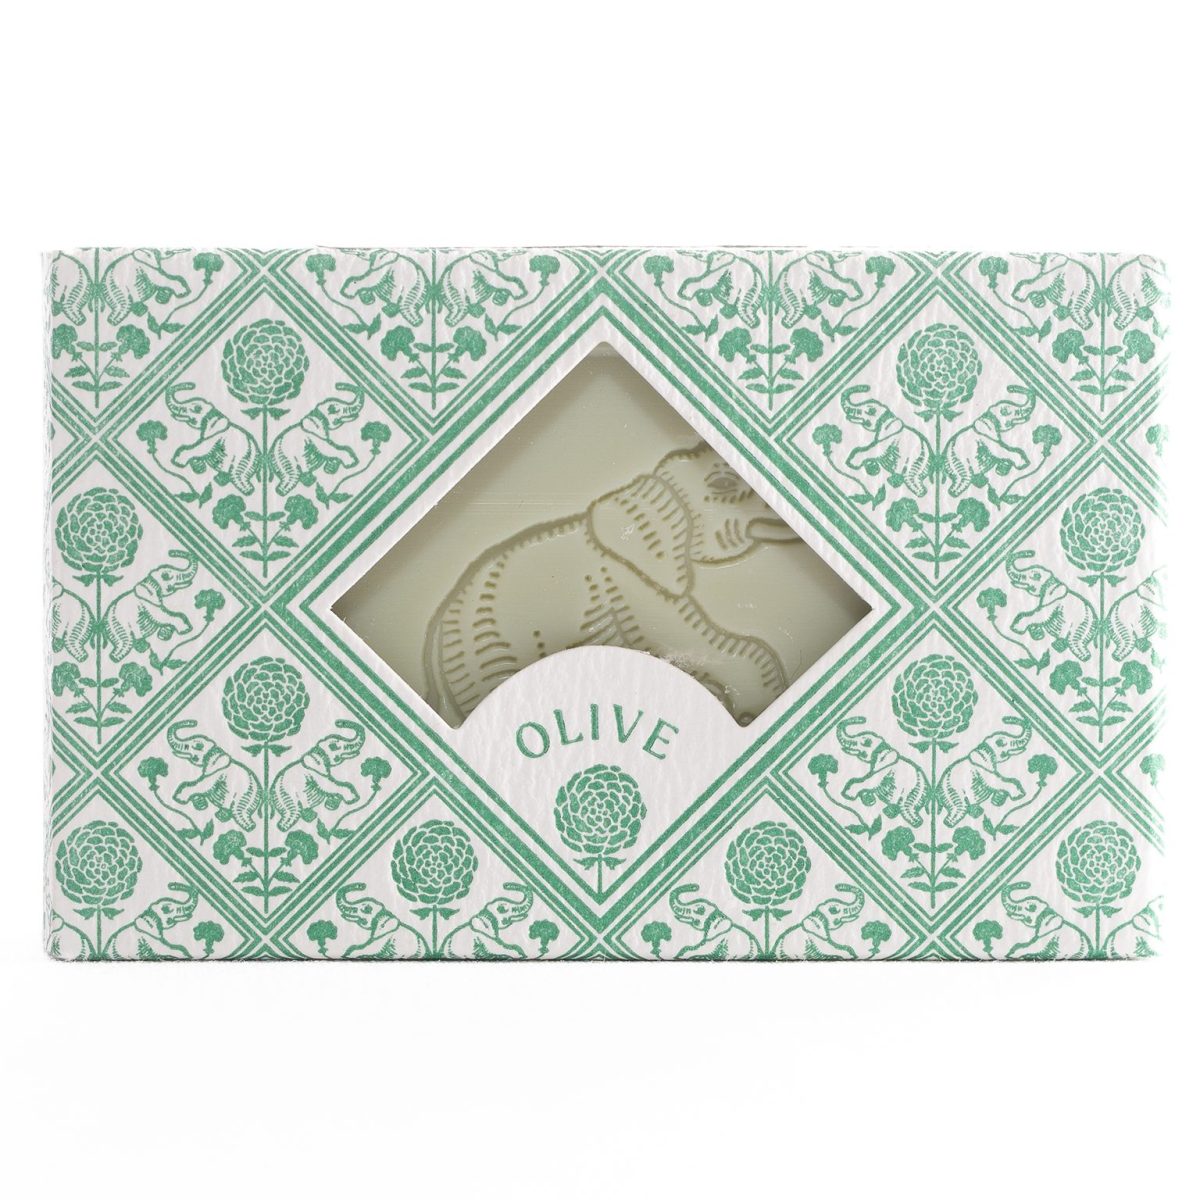 floral covered soap with elephant print